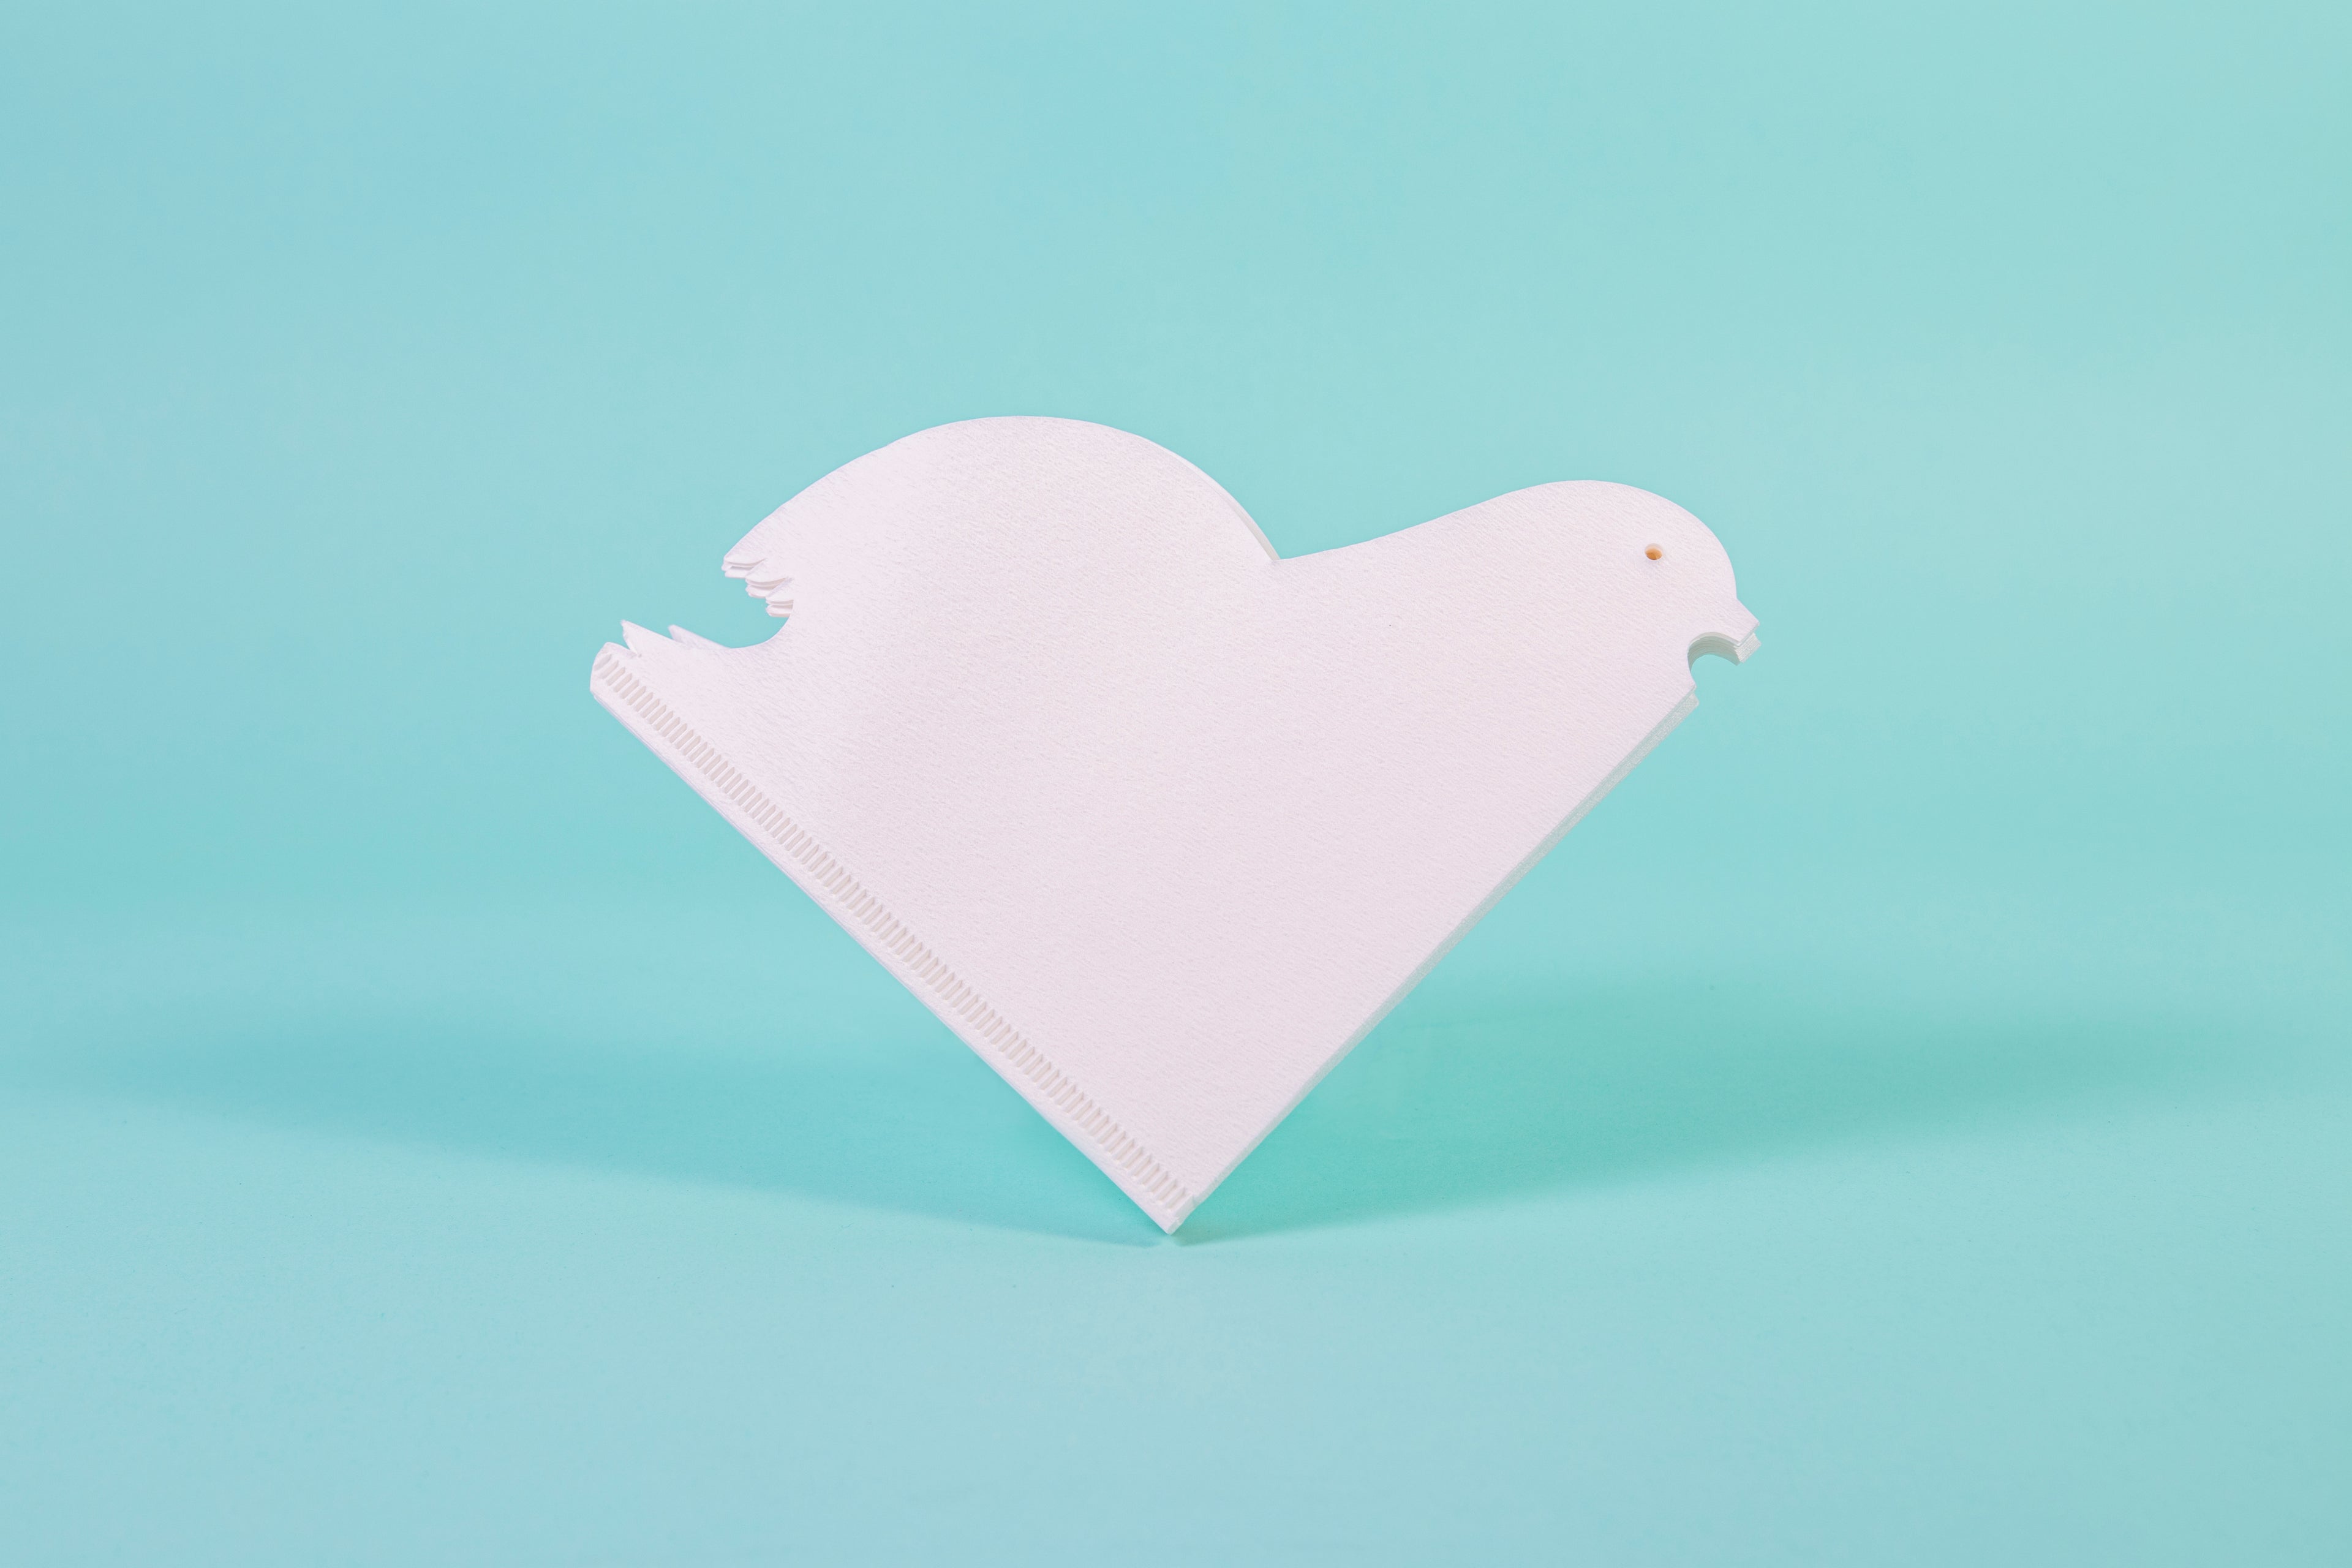 White bird-shaped cone paper filters set against a blue background.